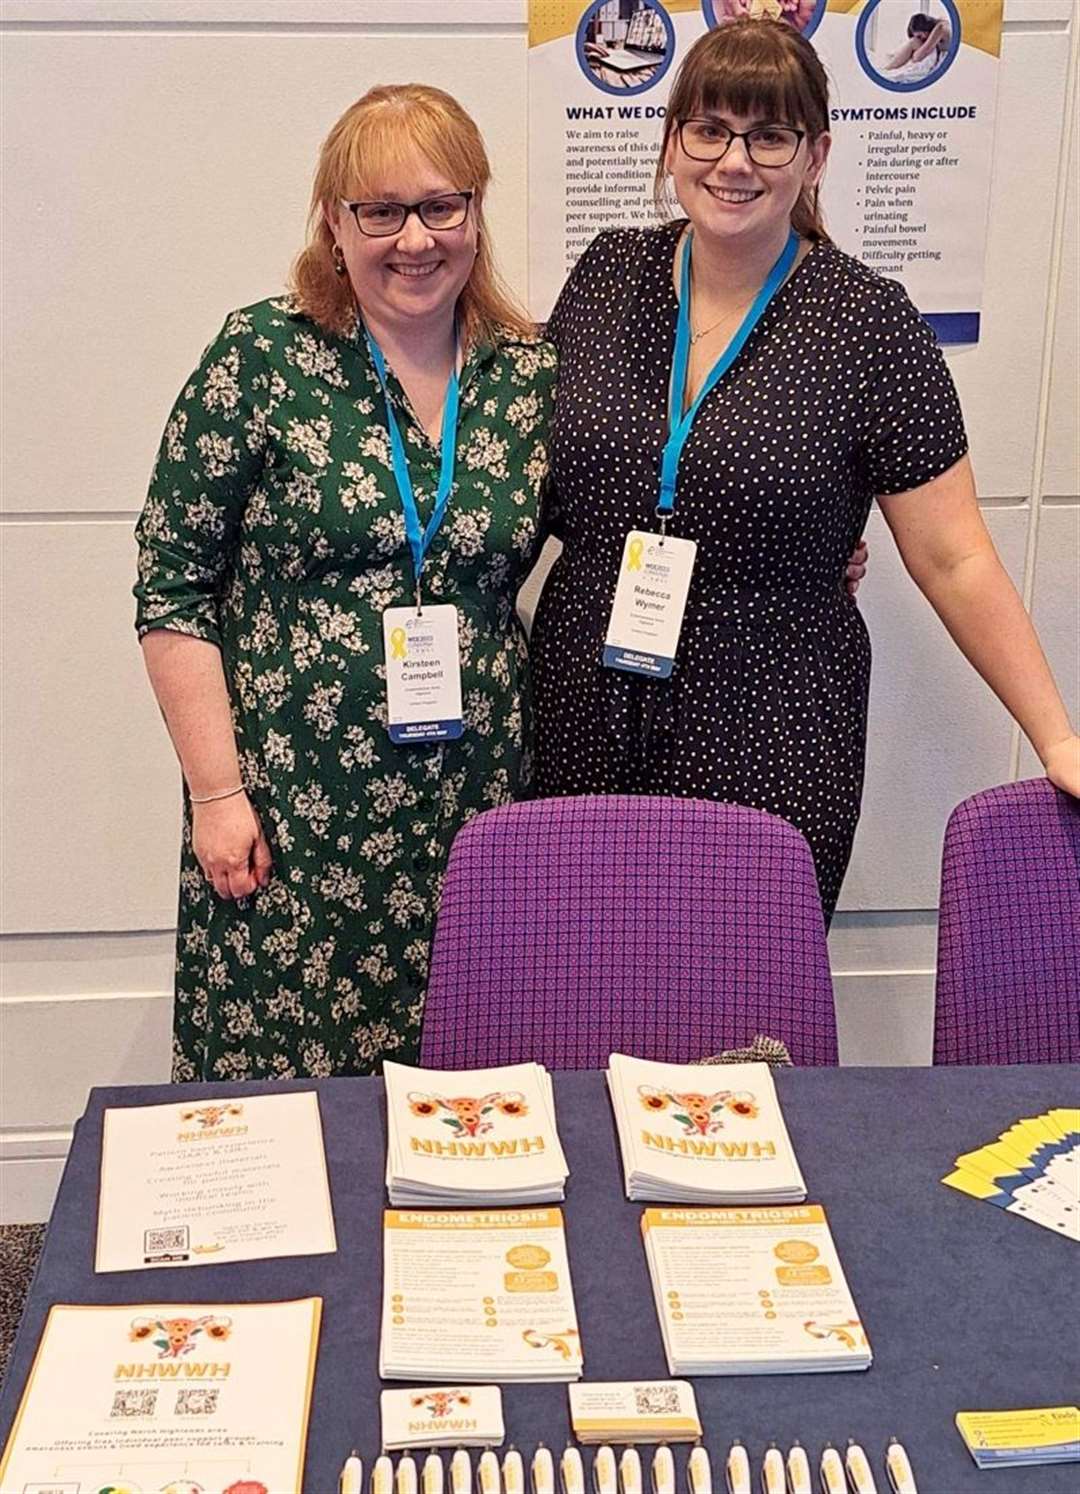 Kirsteen Campbell (left) and Rebecca Wymer are chairperson and vice-chairperson respectively of North Highland Women’s Wellbeing Hub.